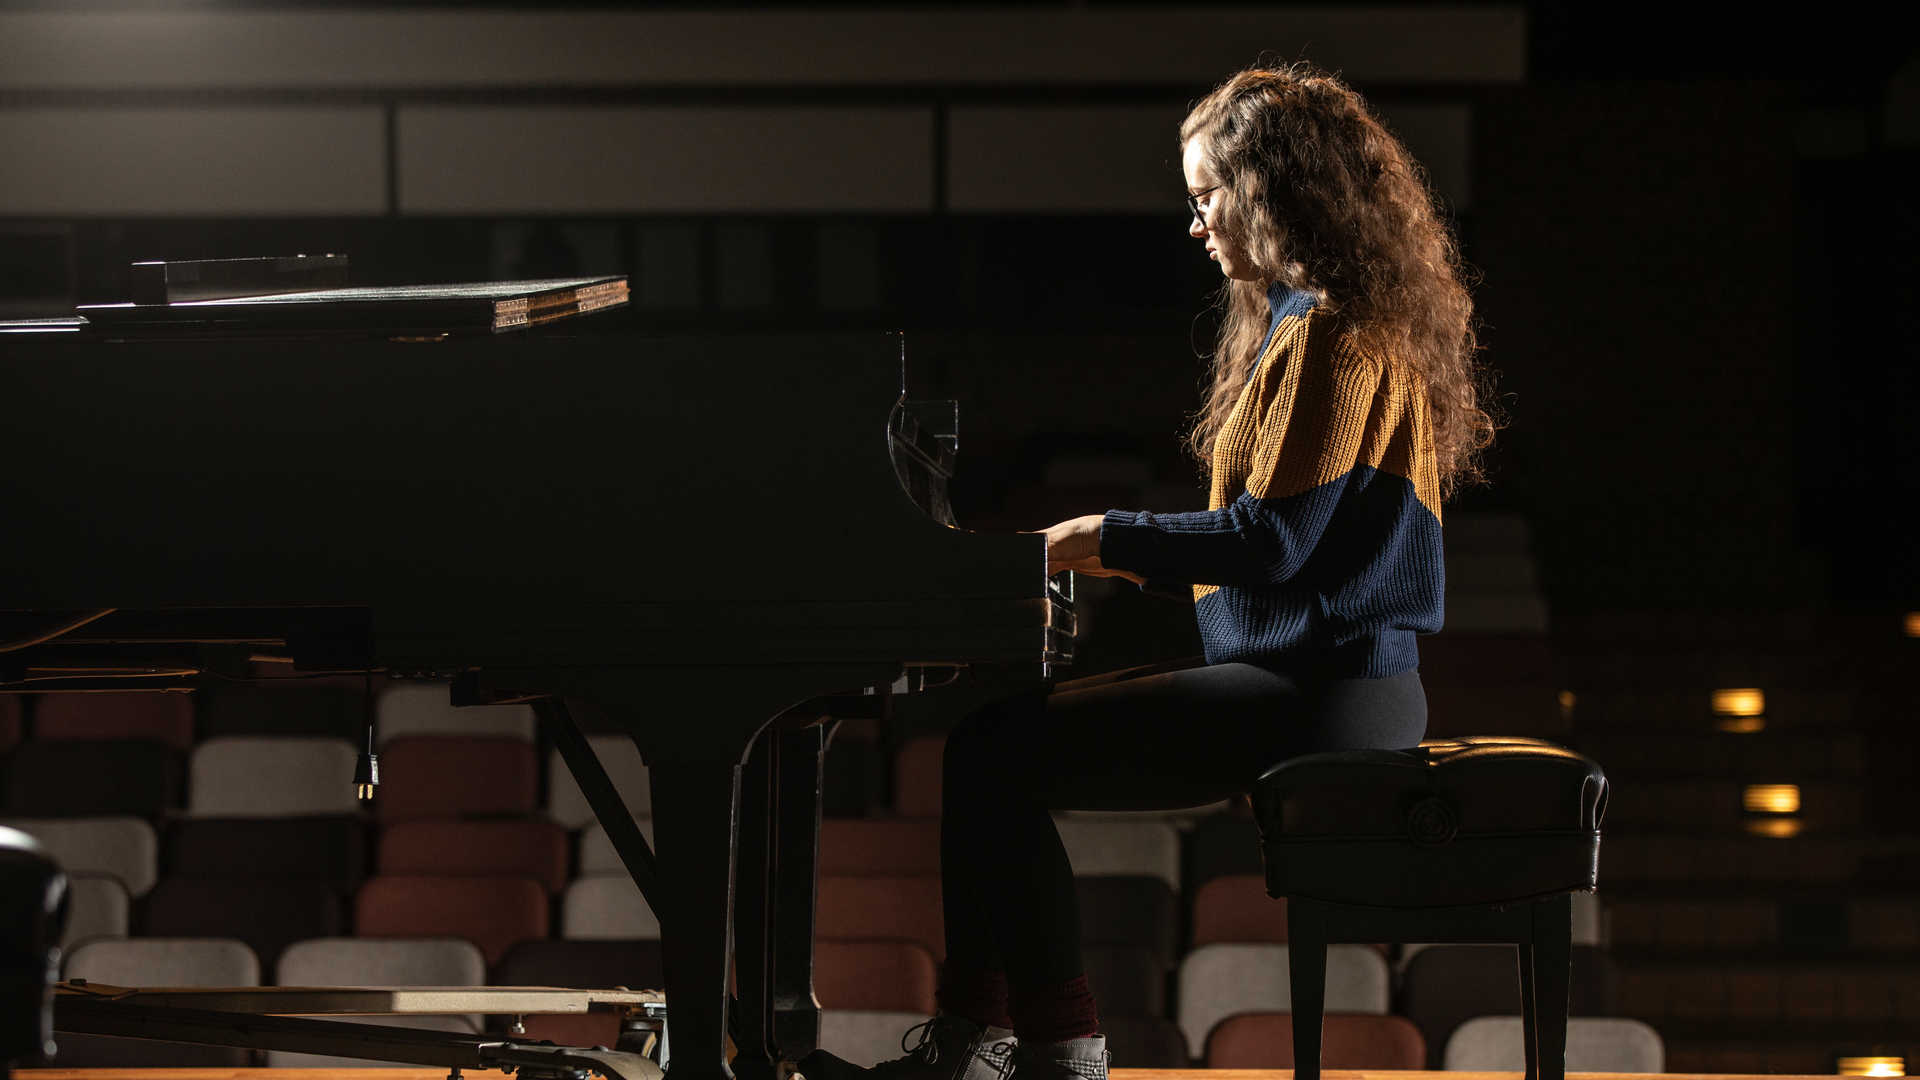 A student plays the piano in a music hall.